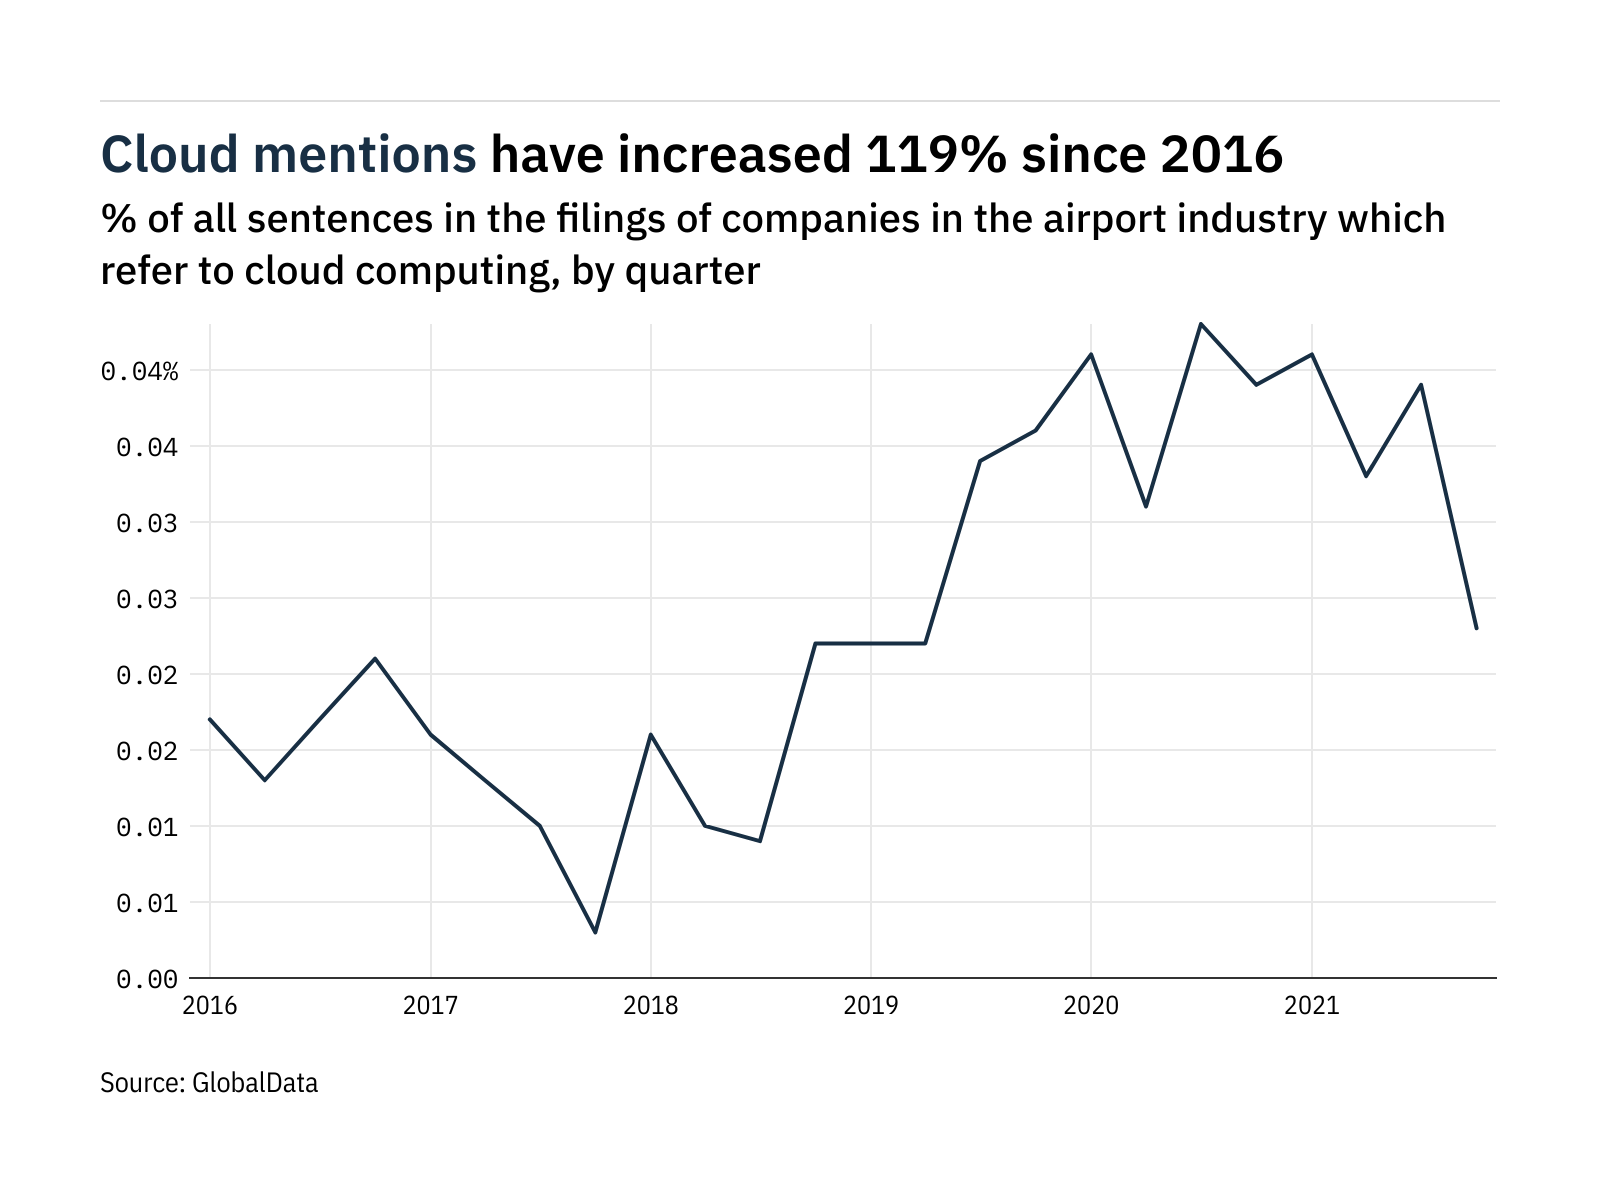 Filings buzz in the airport industry: 41% decrease in cloud computing mentions in Q4 of 2021